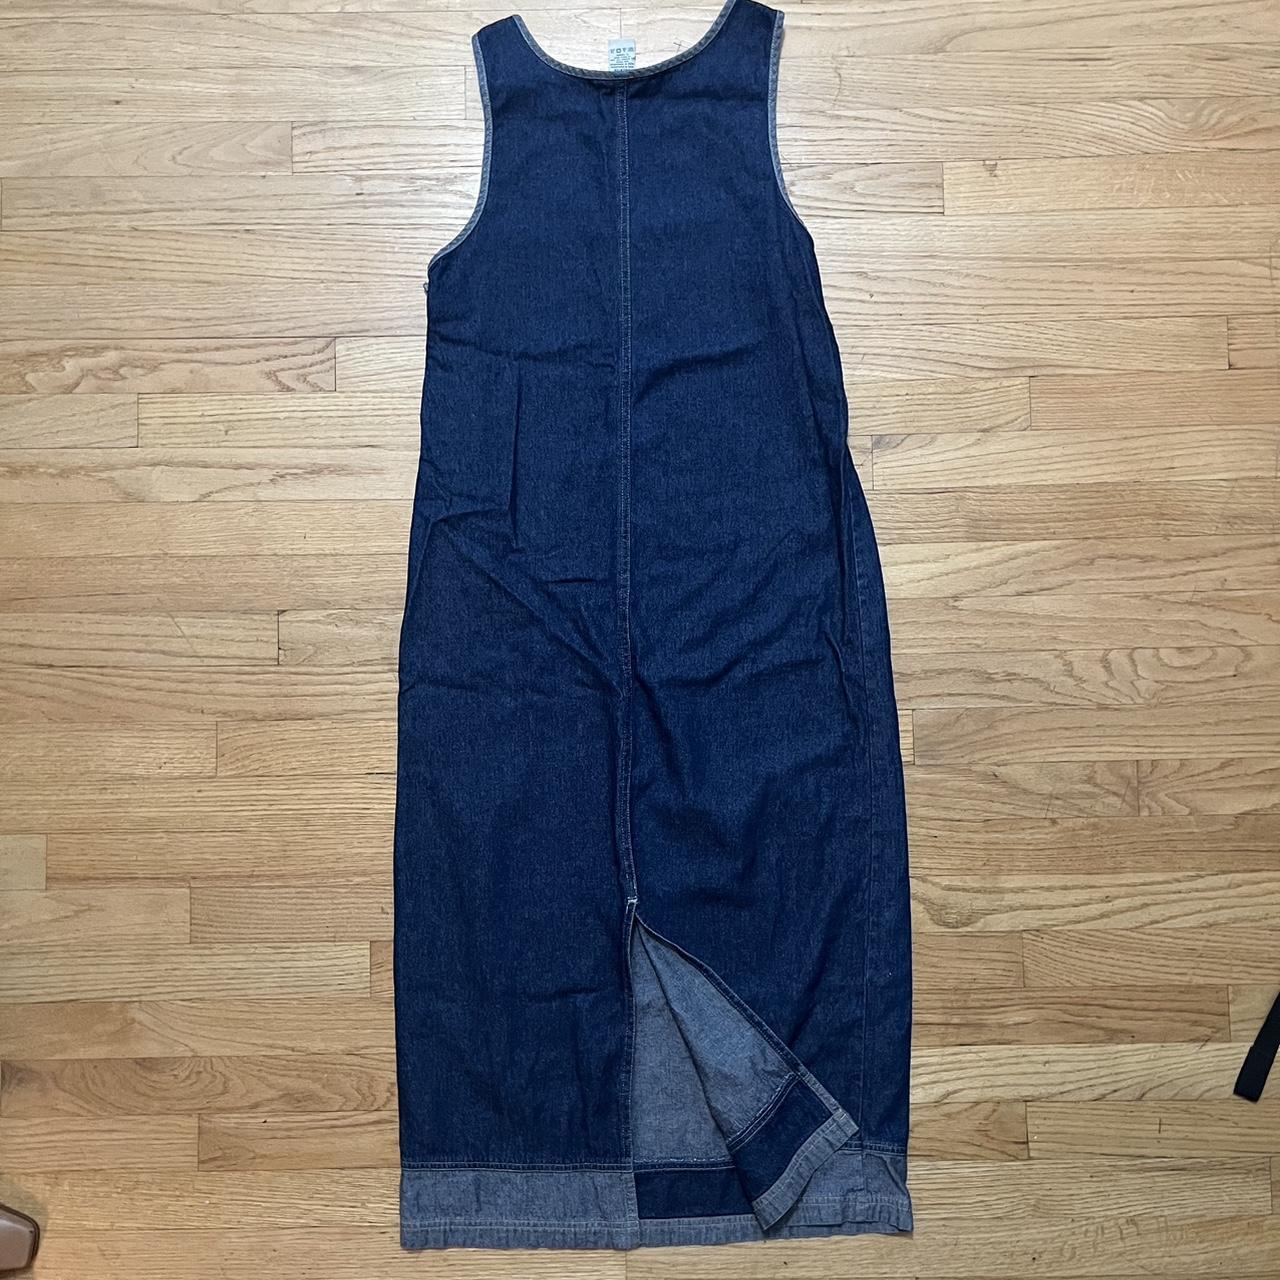 Adorable 90s denim sleeveless maxi dress with front... - Depop